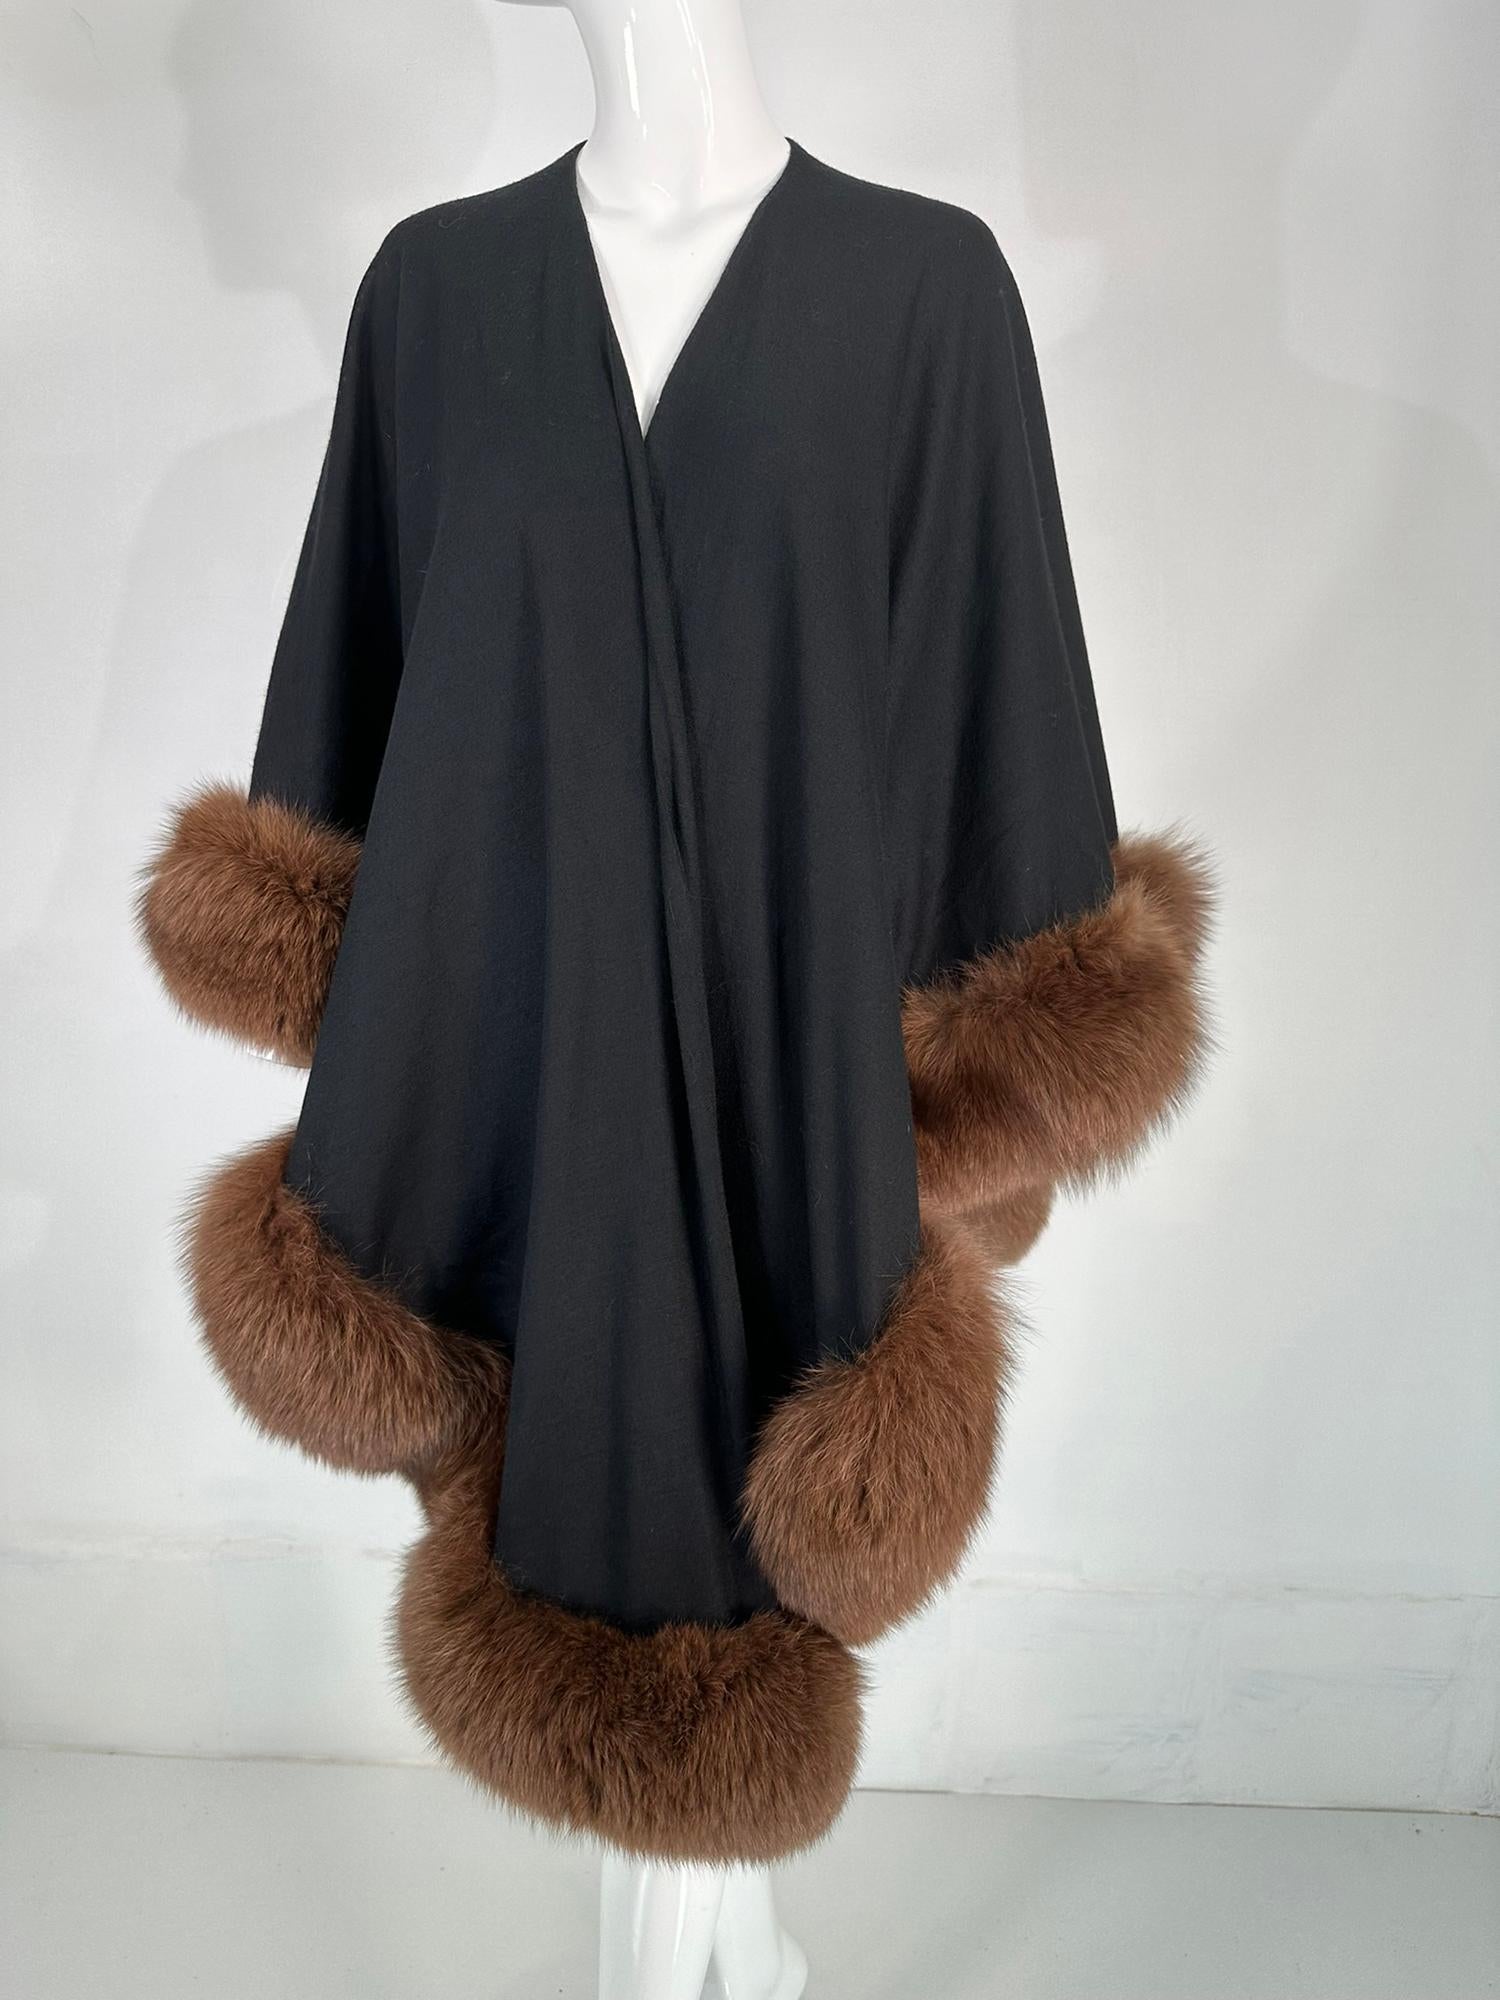 Adrienne Landau sable trimmed black wool knit cape/wrap from the 1990s. A beautiful cape/wrap perfect for daytime or evening events. Warm wool knit cape is easy to wear, it's open at the front, longer at the front sides and back with sleeve length